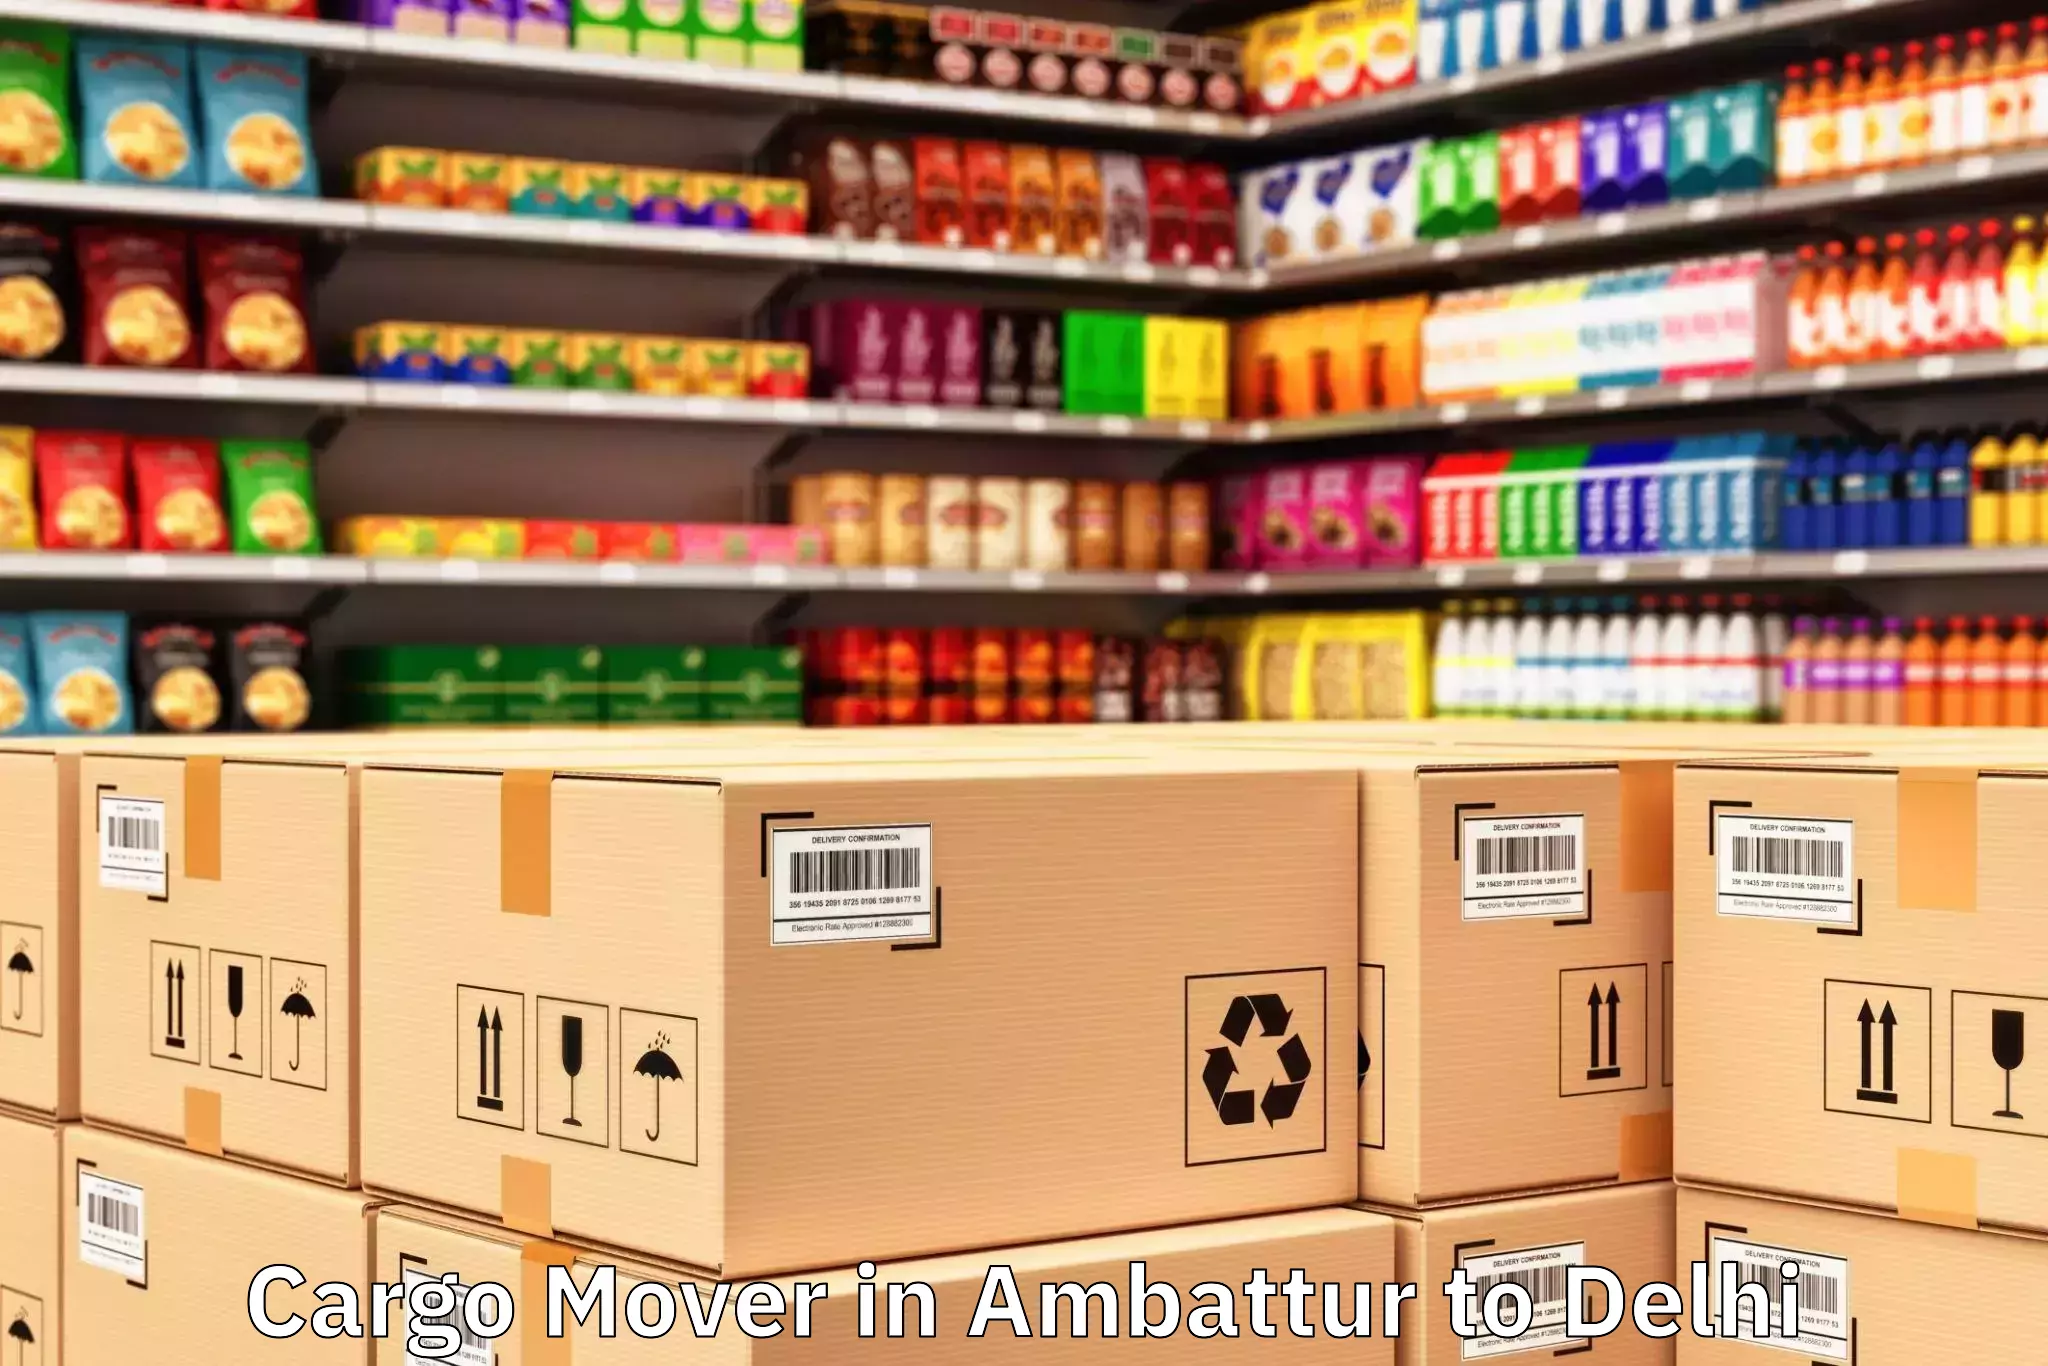 Book Your Ambattur to Delhi Pharmaceutical Sciences And Research University New Delhi Cargo Mover Today